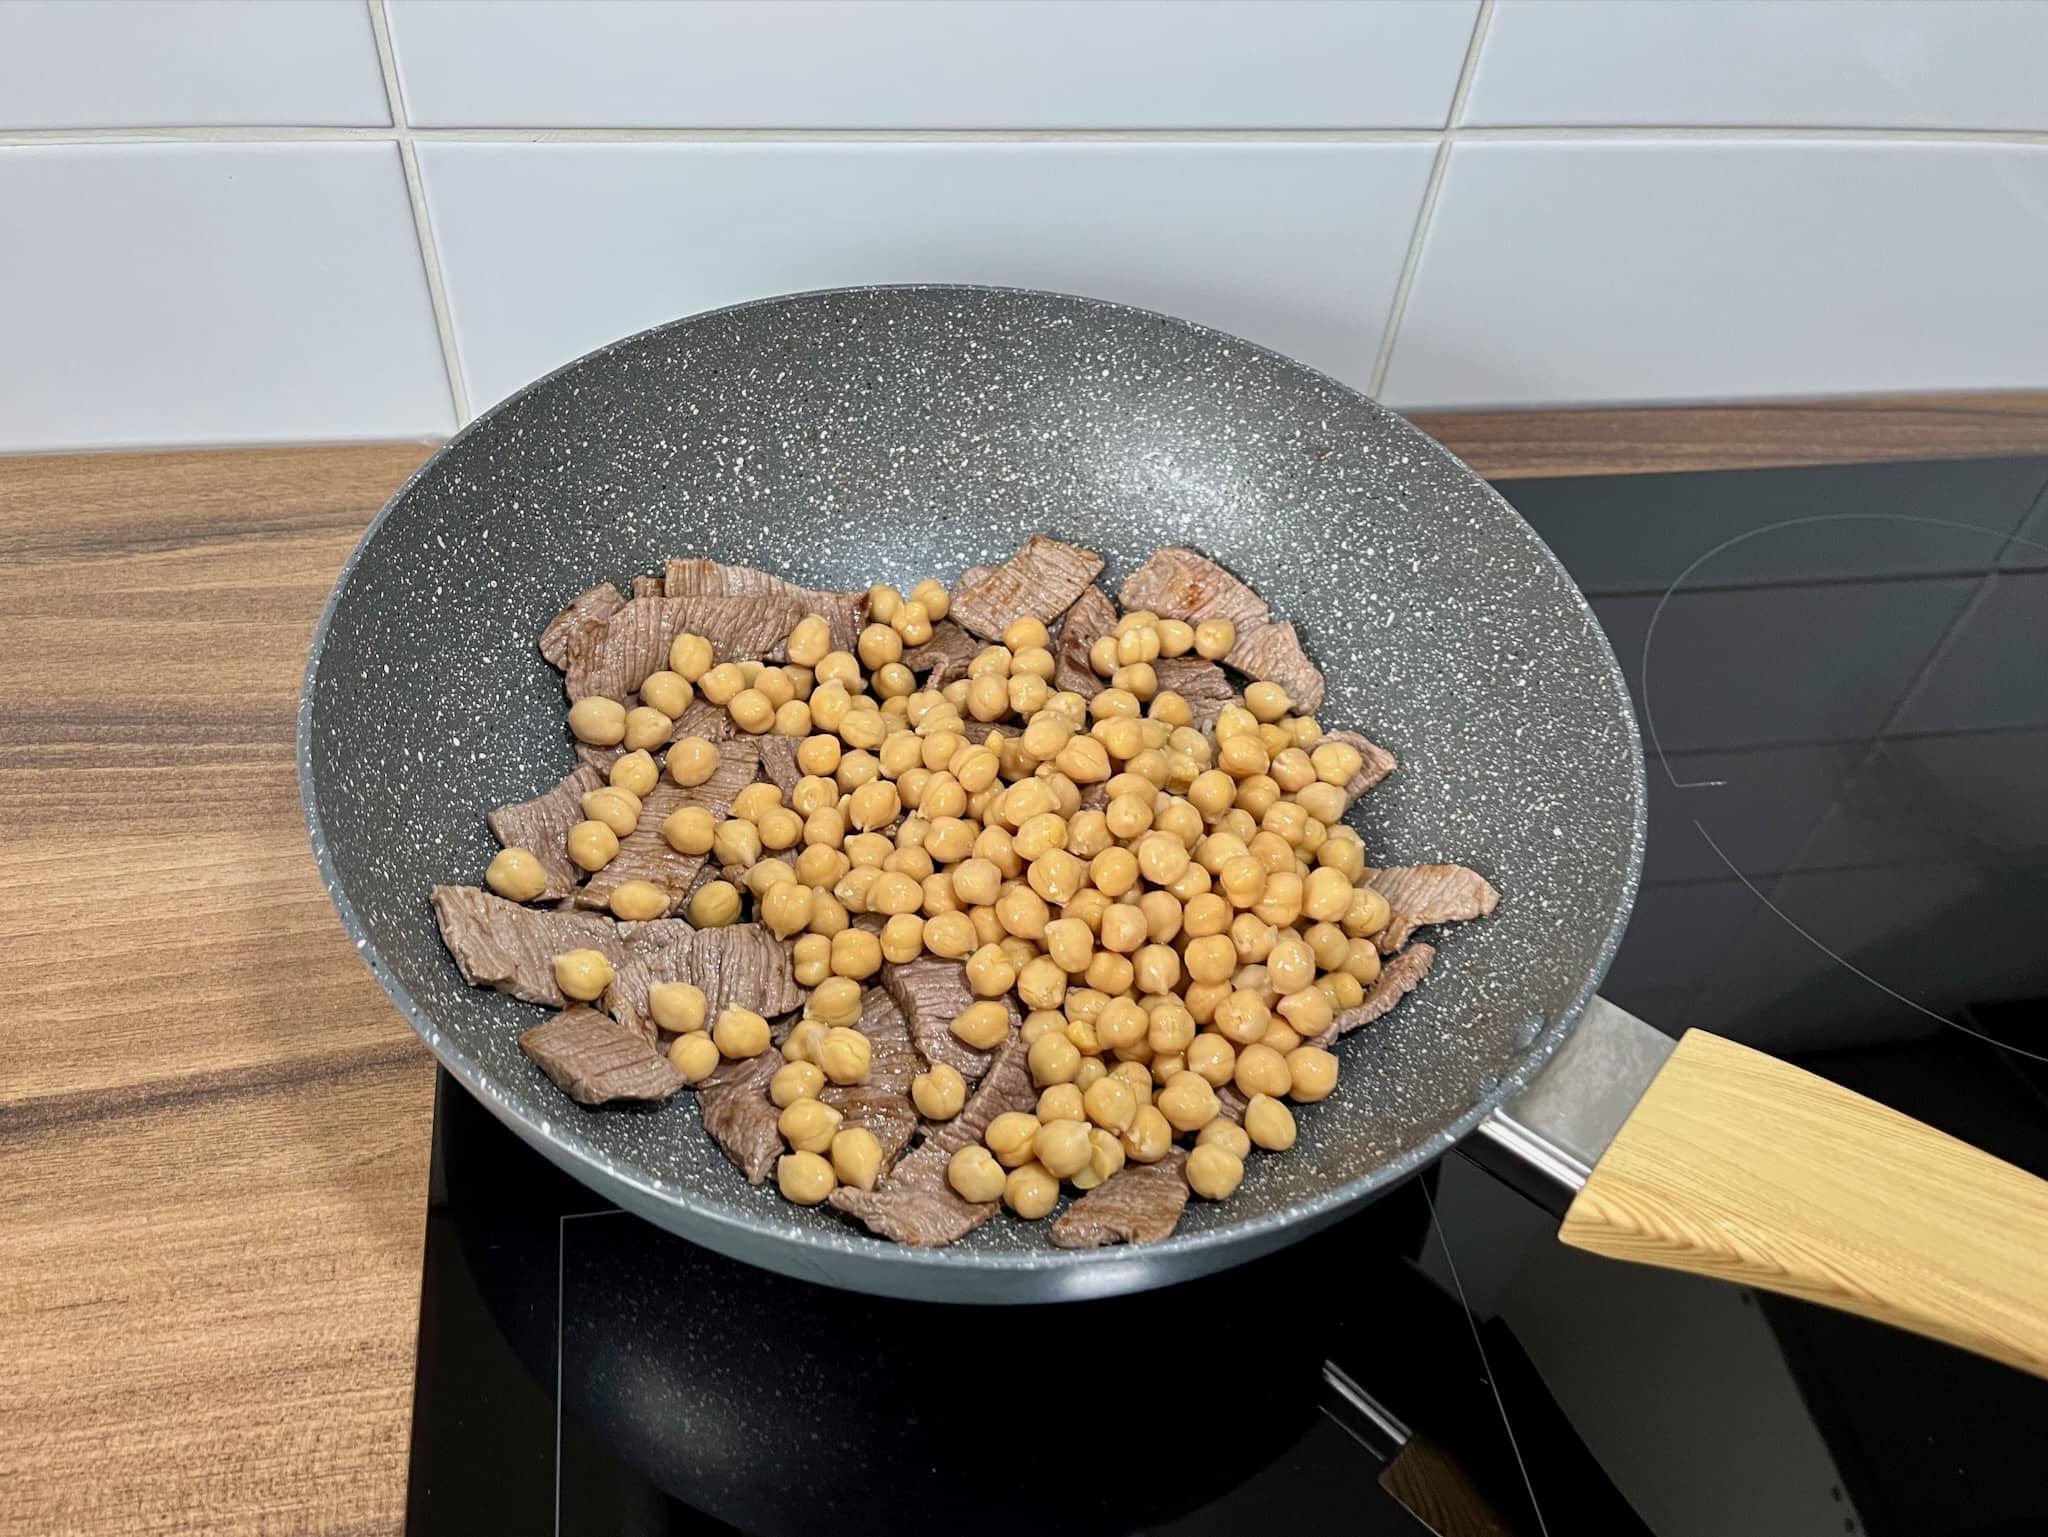 Cooked steak meat slices with chickpeas on top, in a large skillet